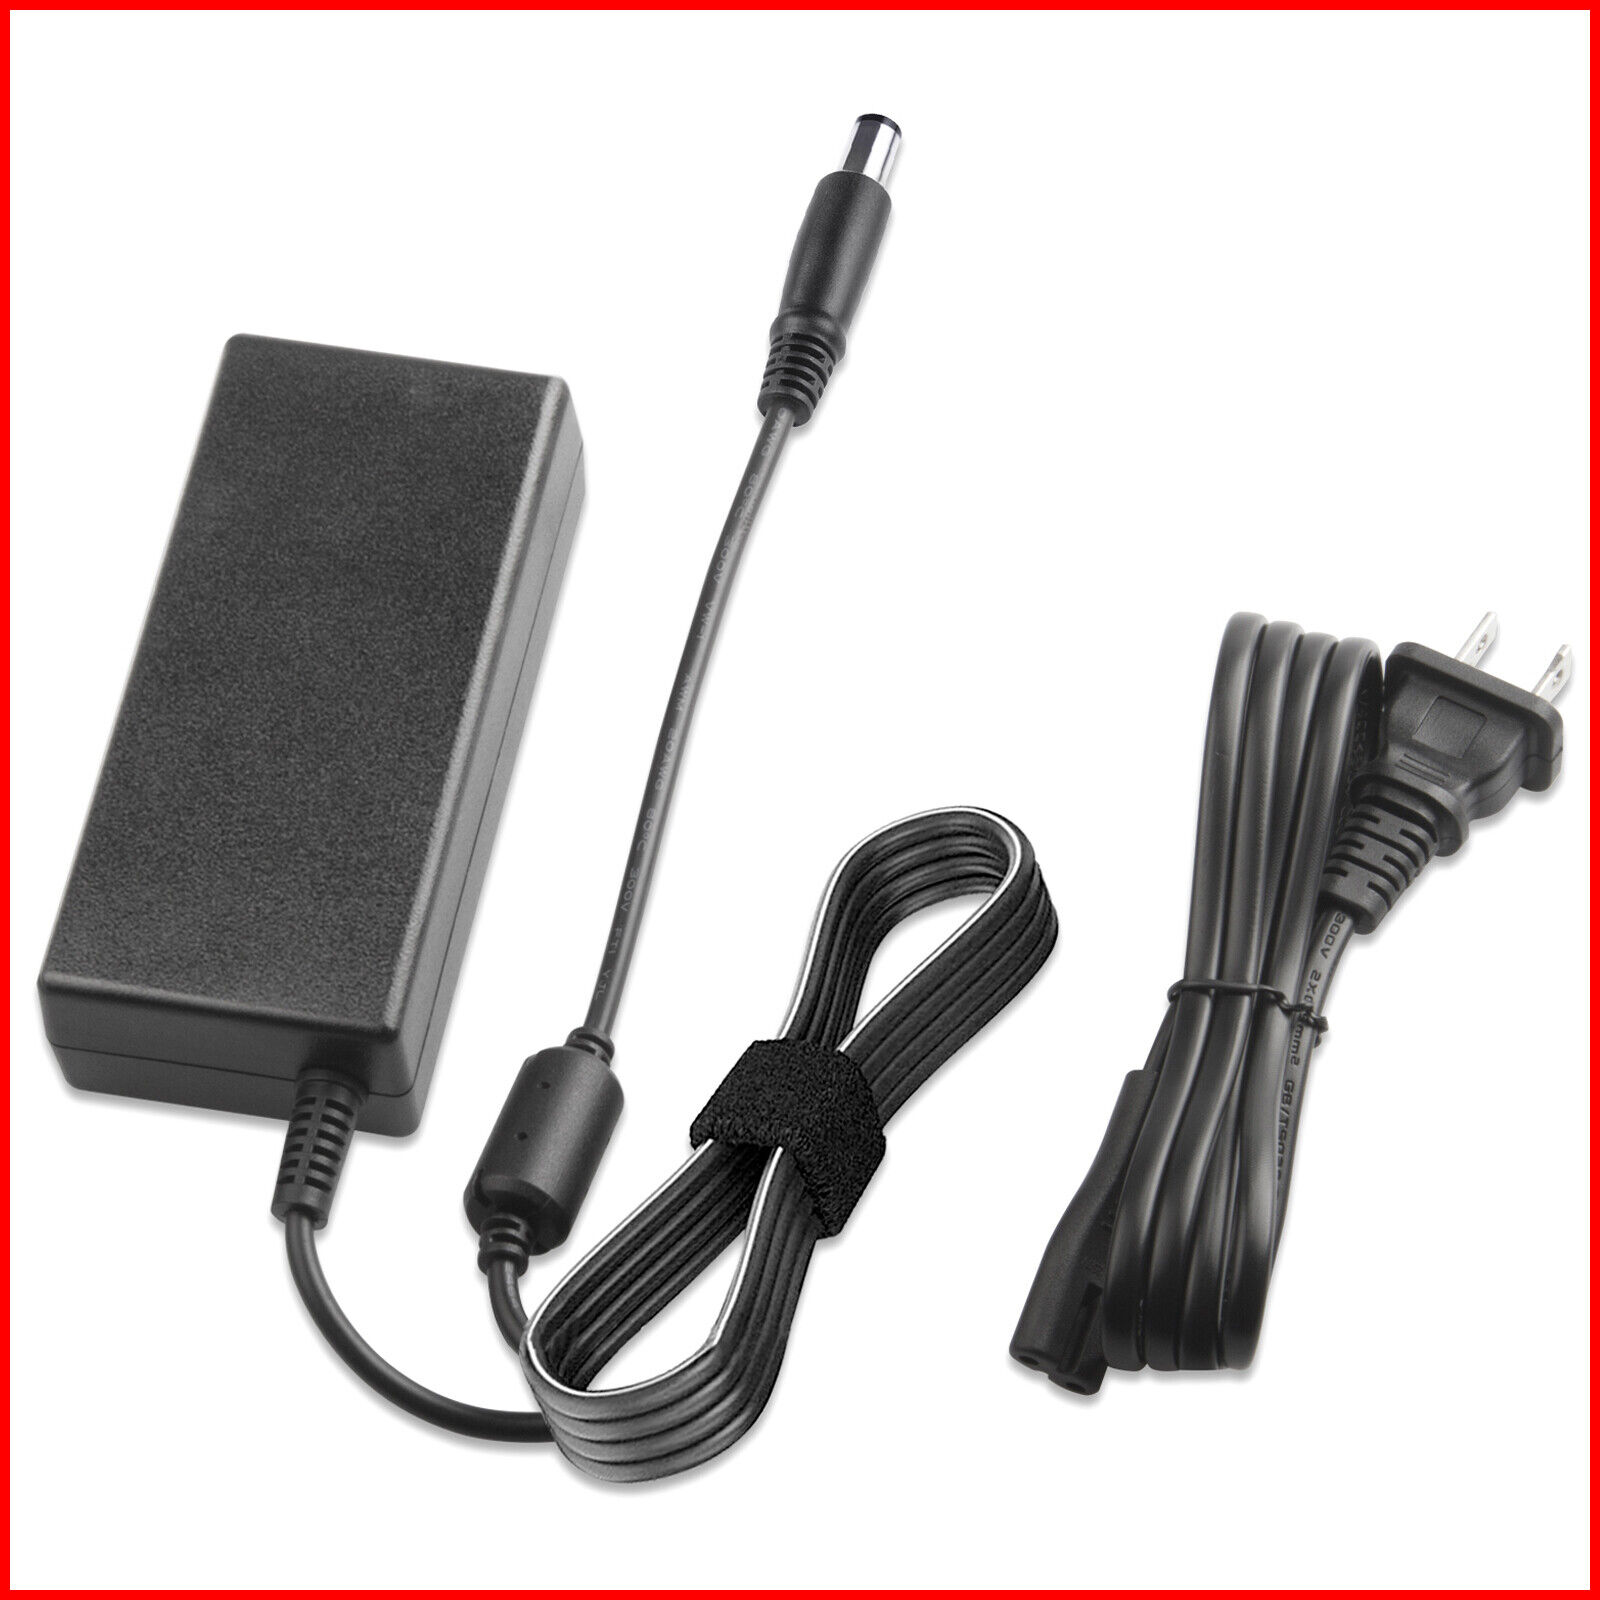 90W 65W Laptop Charger Power Cord for HP EliteBook 830 840 850 G1 G2 G3 G4 G5 G6